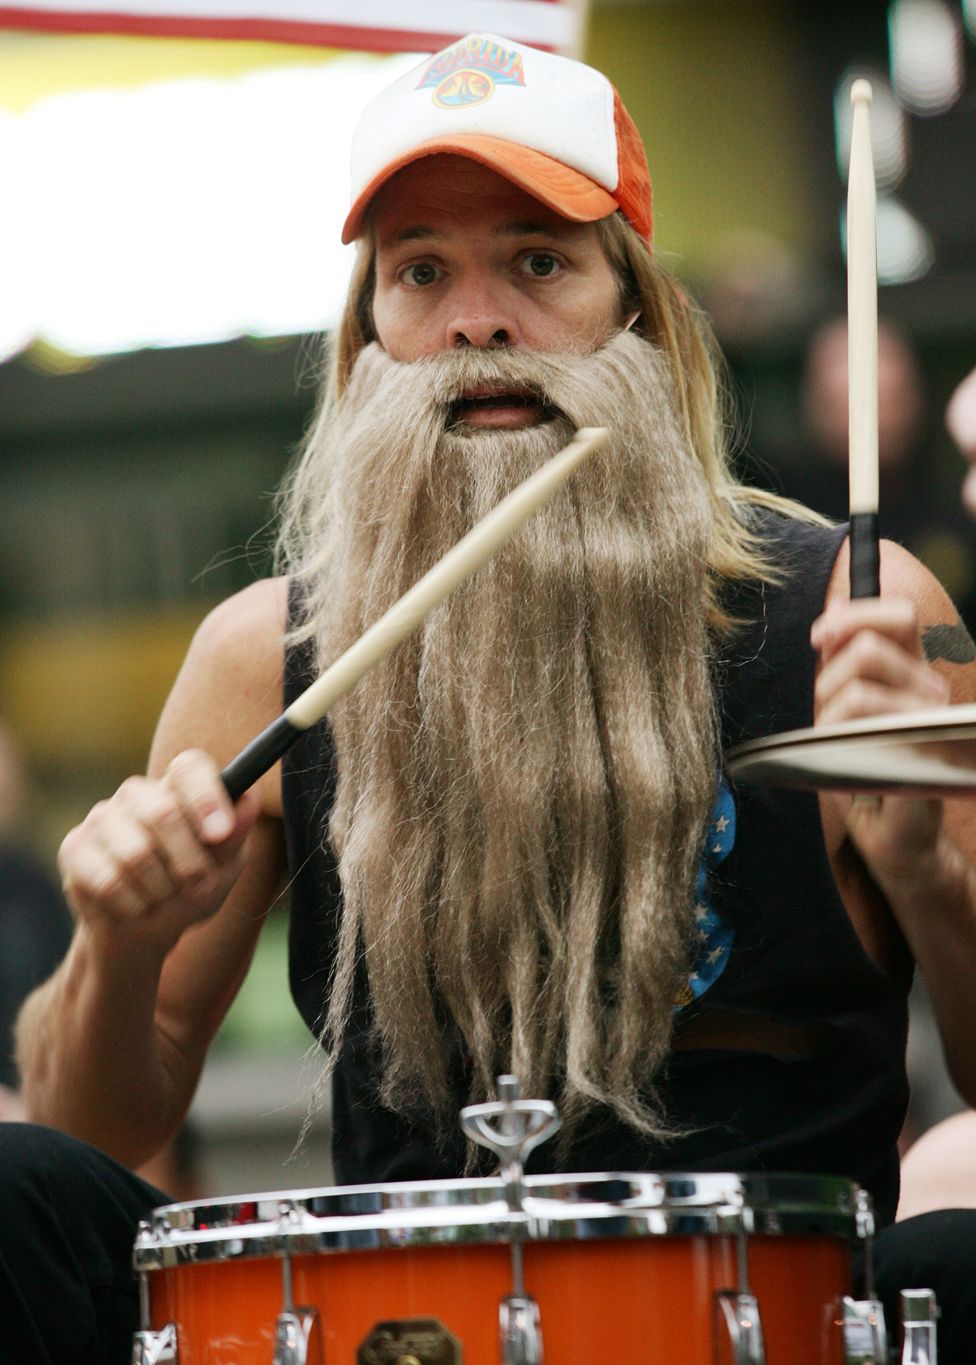 Musician Taylor Hawkins of Foo Fighters performs on the Streets of Kansas City on September 16, 2011 in Kansas City, Missouri.